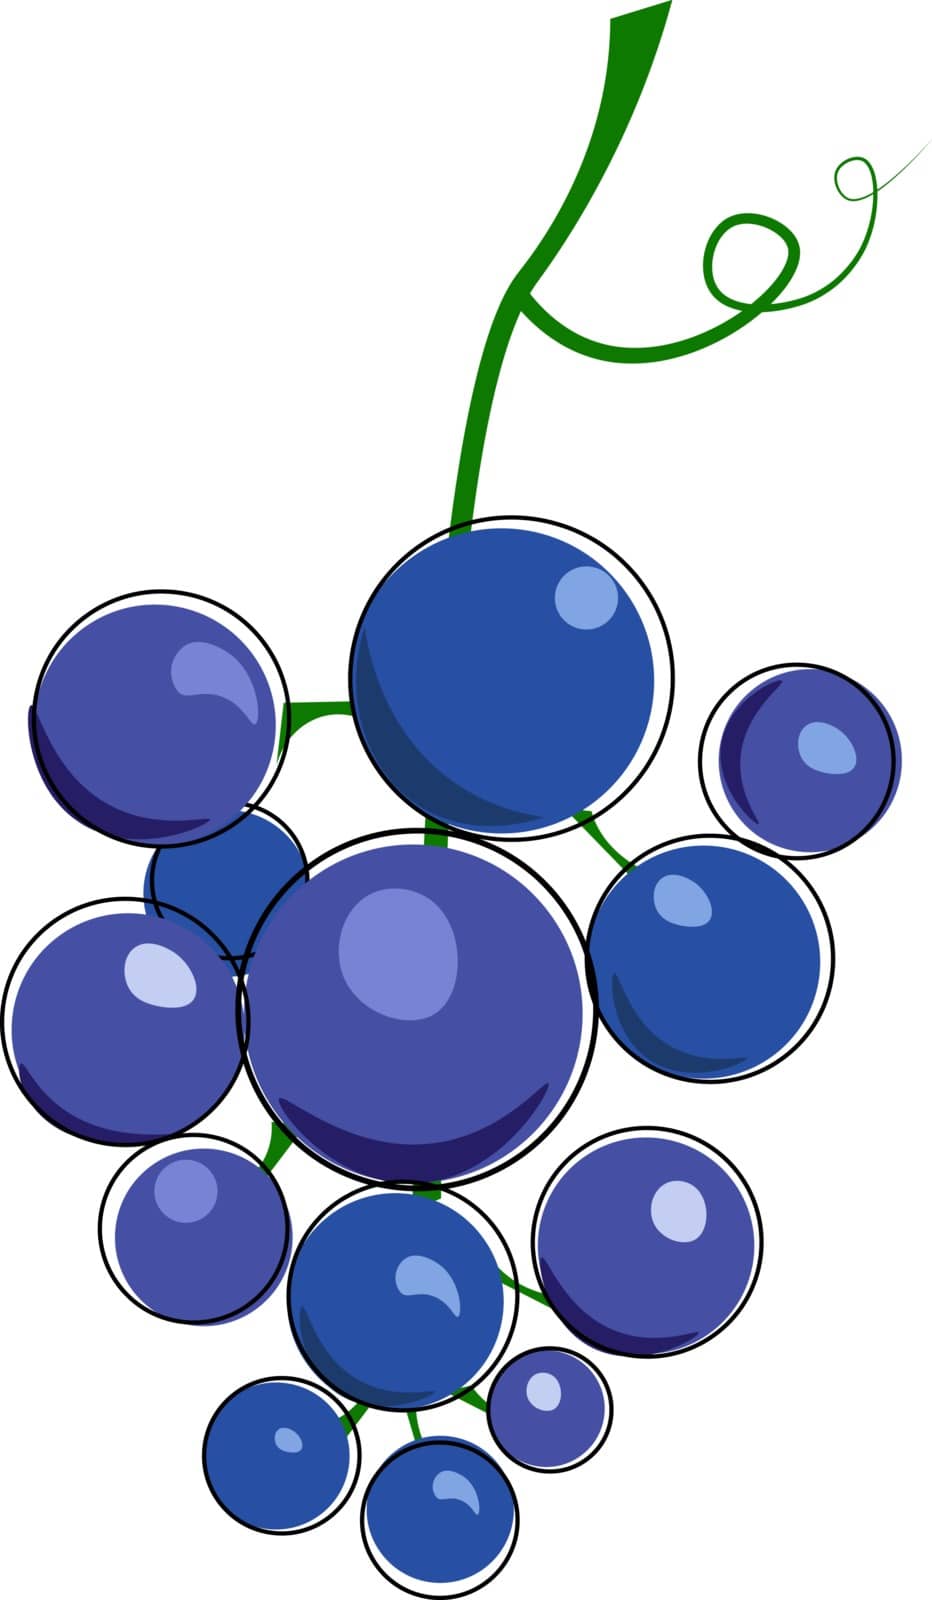 Cluster of blue grape with tendril illustration vector on white background